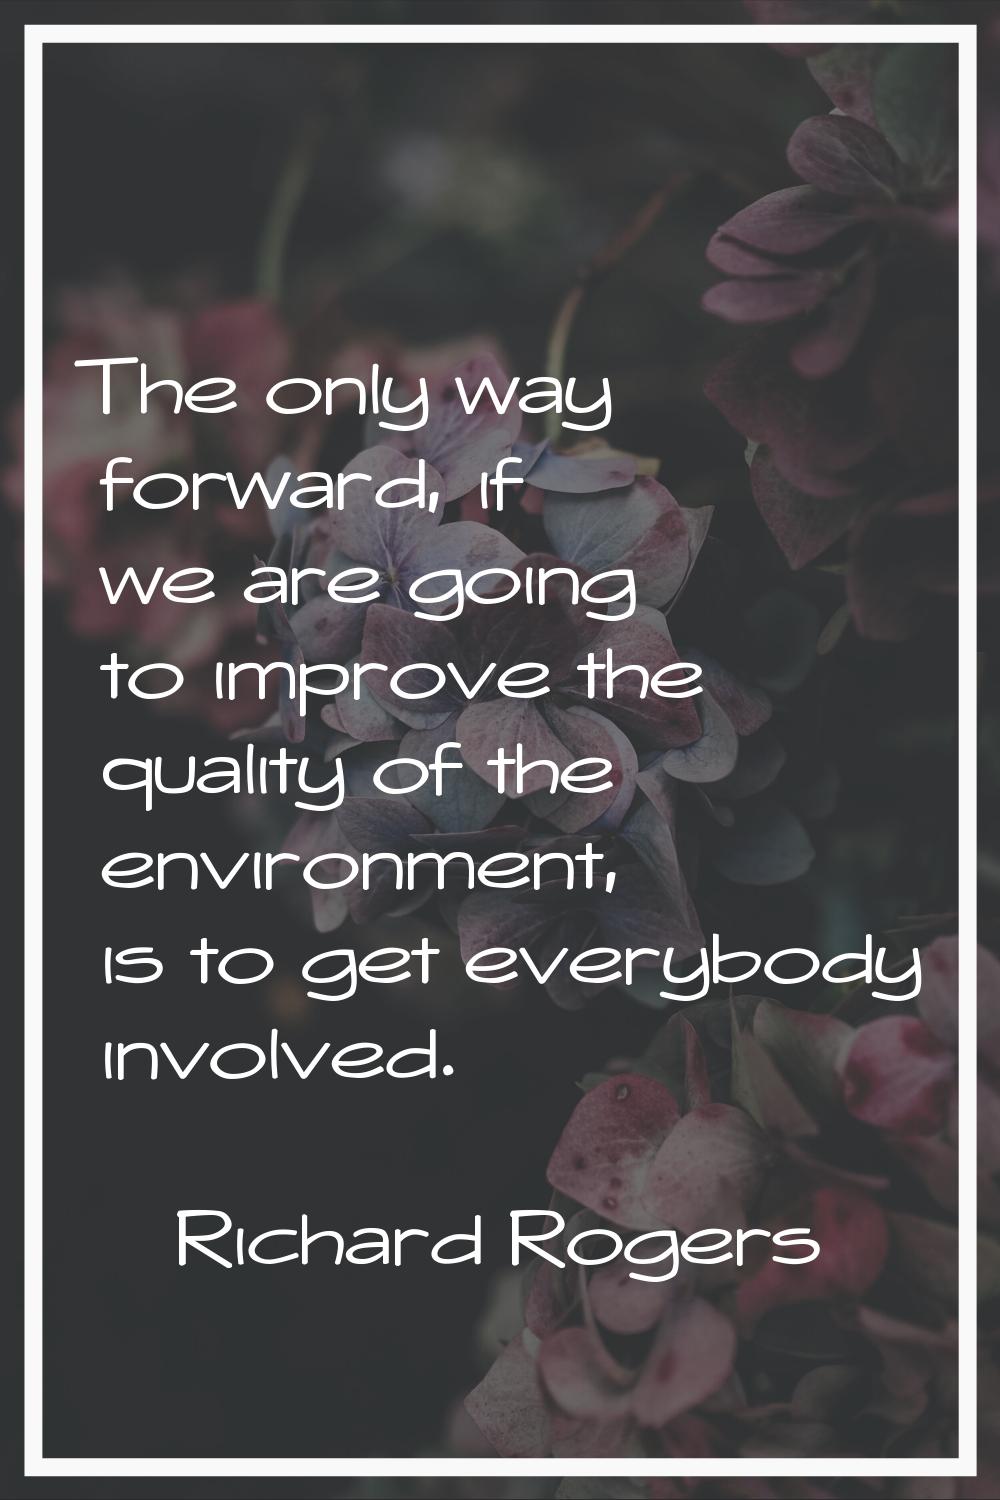 The only way forward, if we are going to improve the quality of the environment, is to get everybod